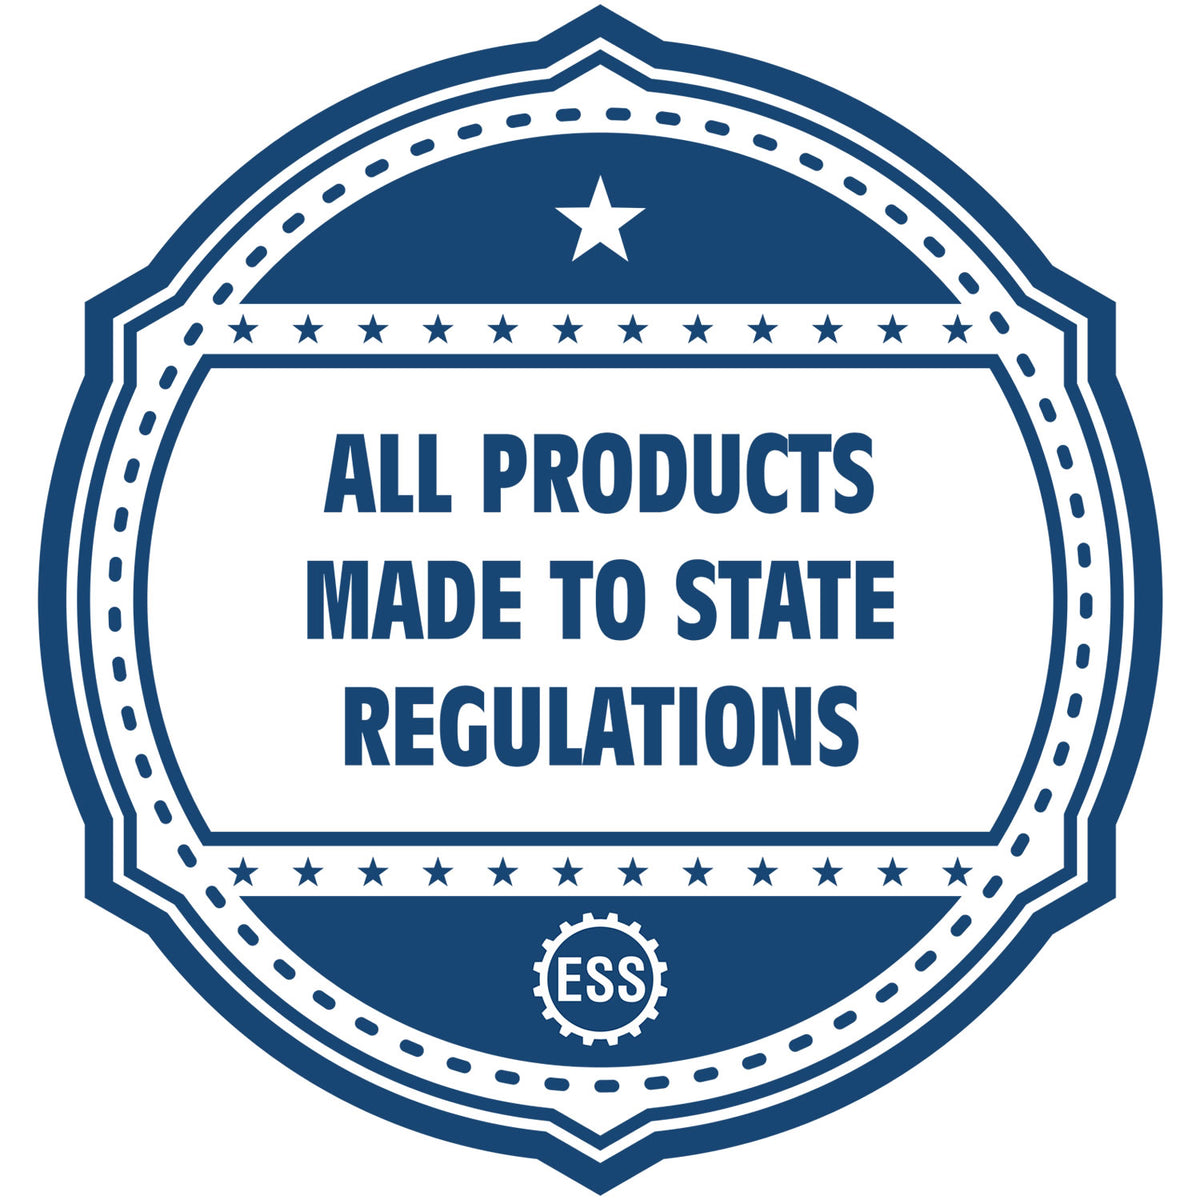 An icon or badge element for the Slim Pre-Inked Alabama Landscape Architect Seal Stamp showing that this product is made in compliance with state regulations.